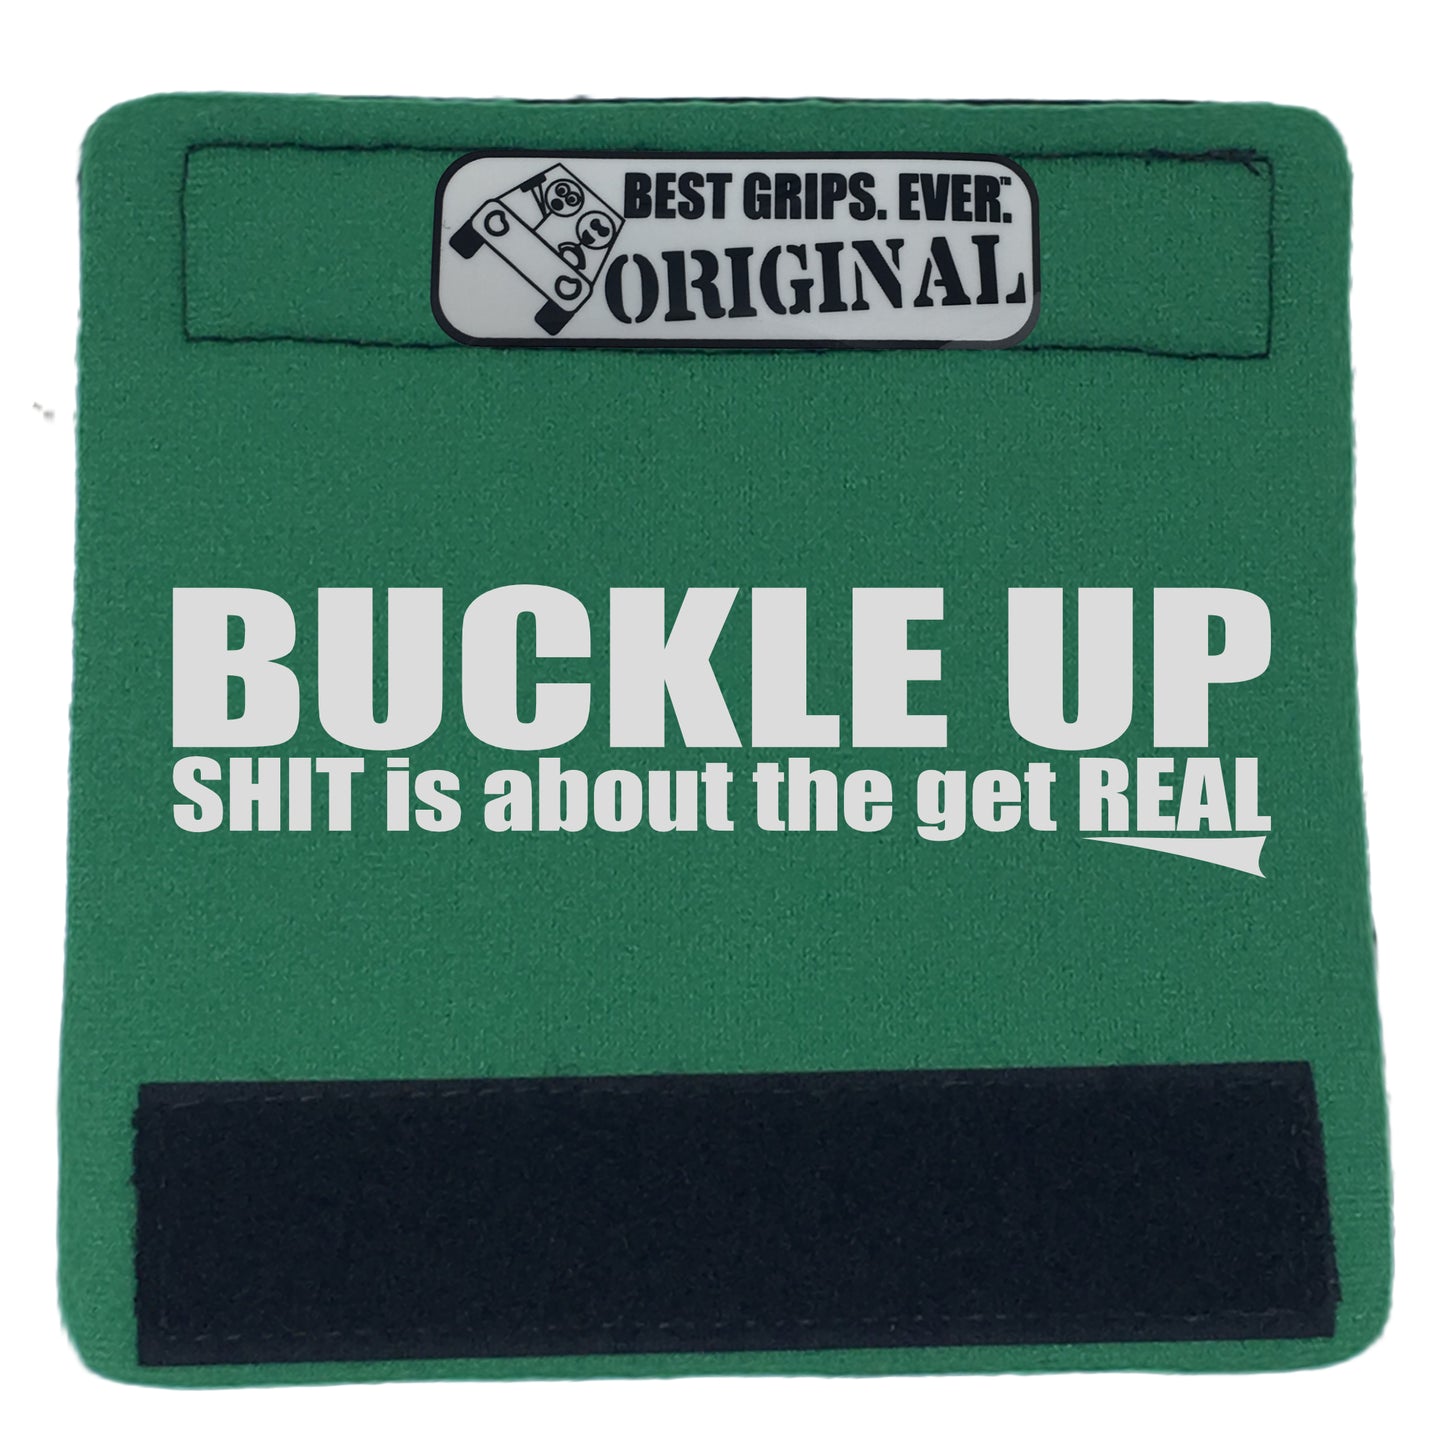 The Buckle Up Grip. - BEST GRIPS. EVER.®